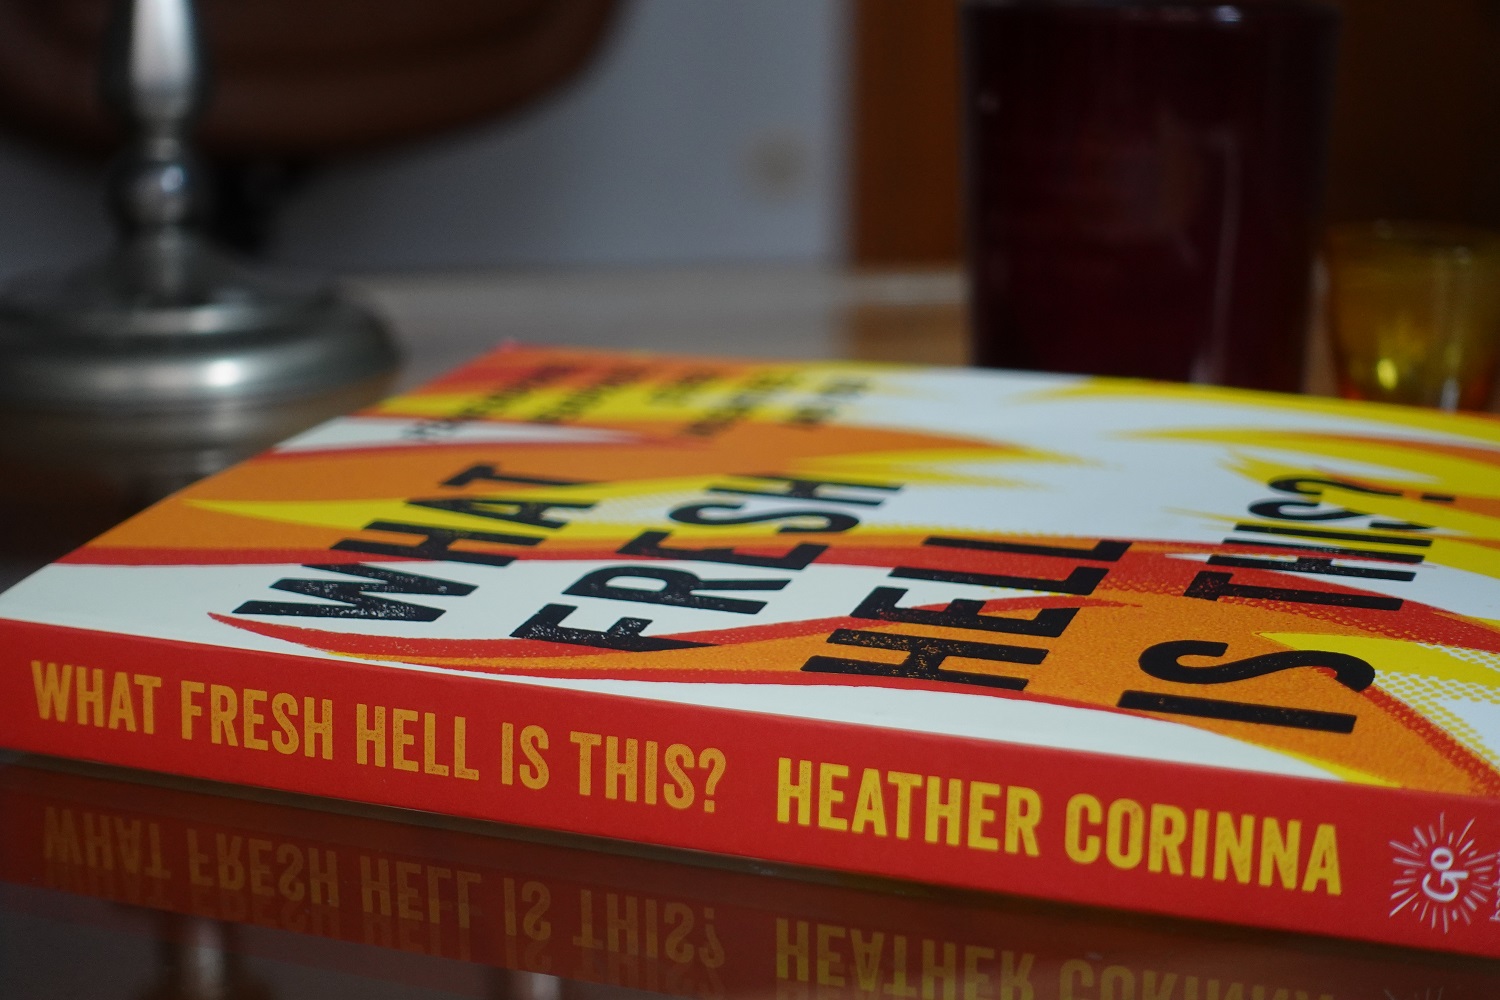 Heather Corinna's book is lying on a table. The cover has red, orange, yellow and white flames.